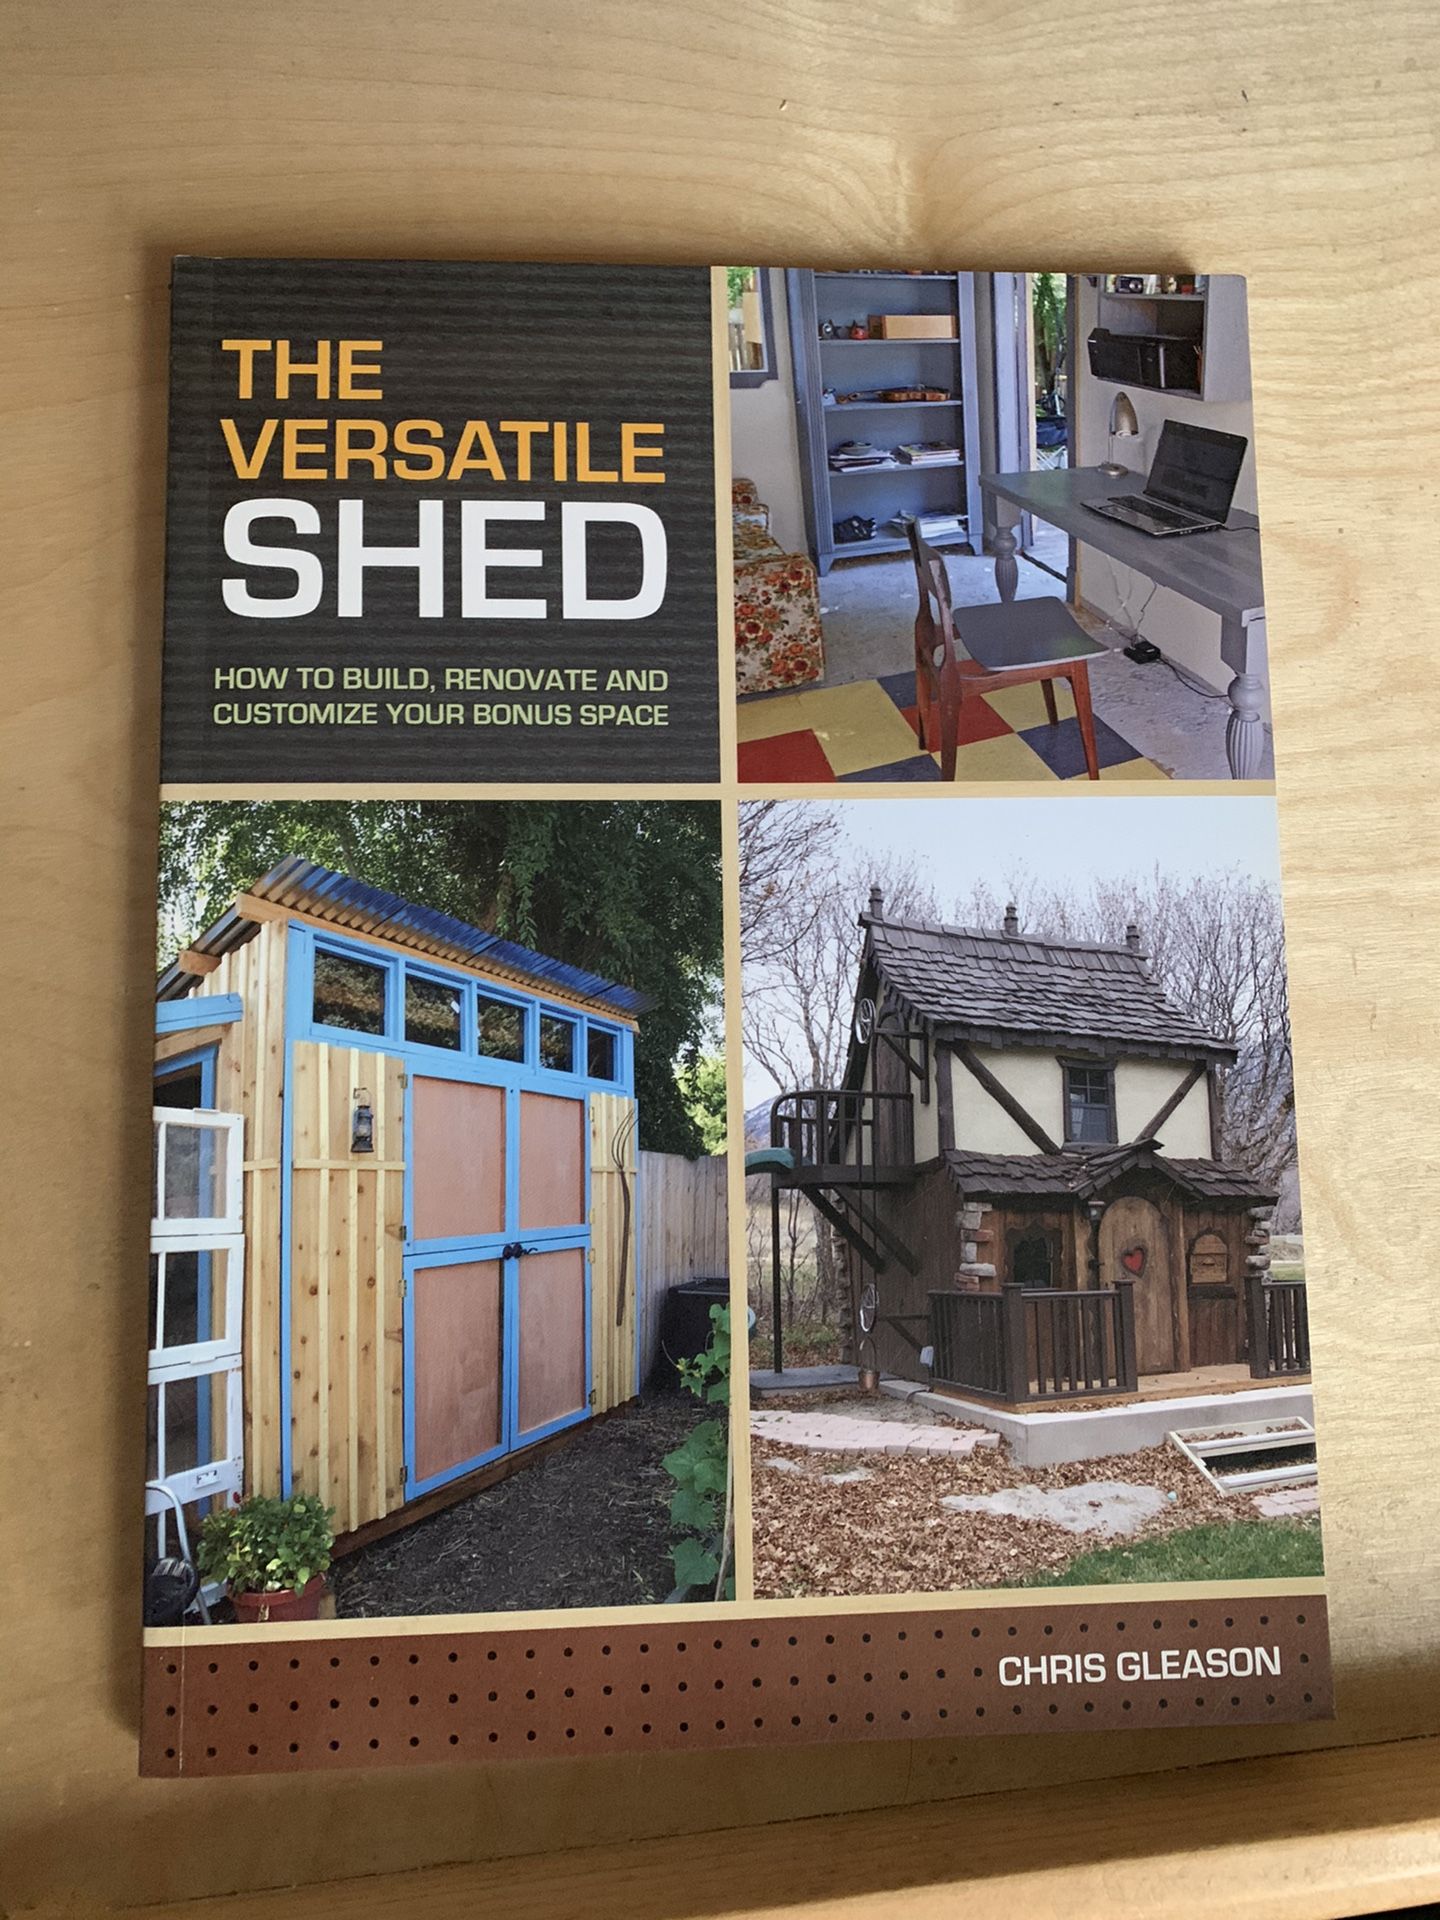 The versatile shed